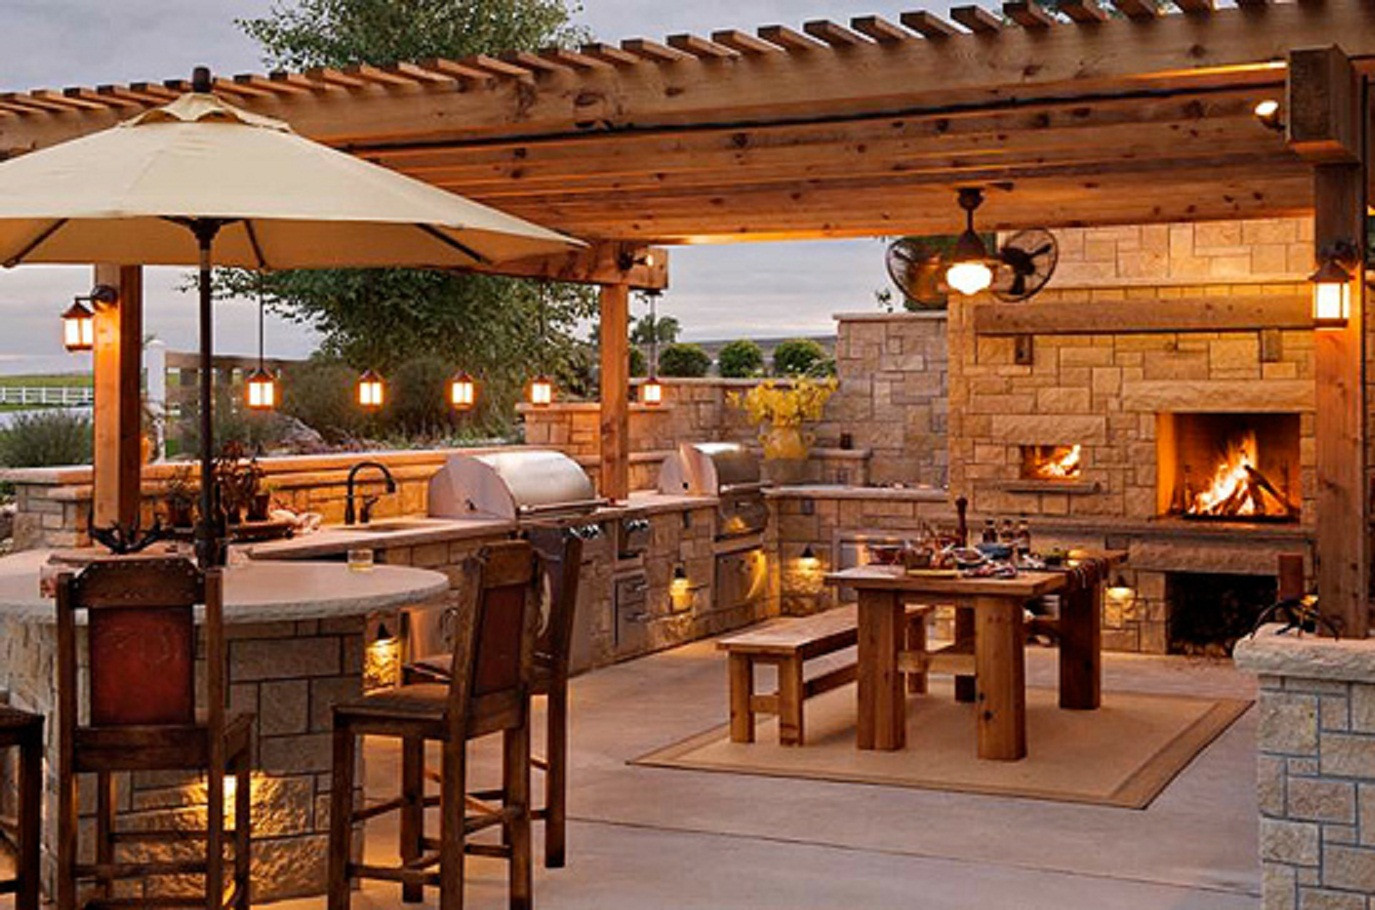 Outdoor Kitchen Decor
 How to Design Your Perfect Outdoor kitchen Outdoor